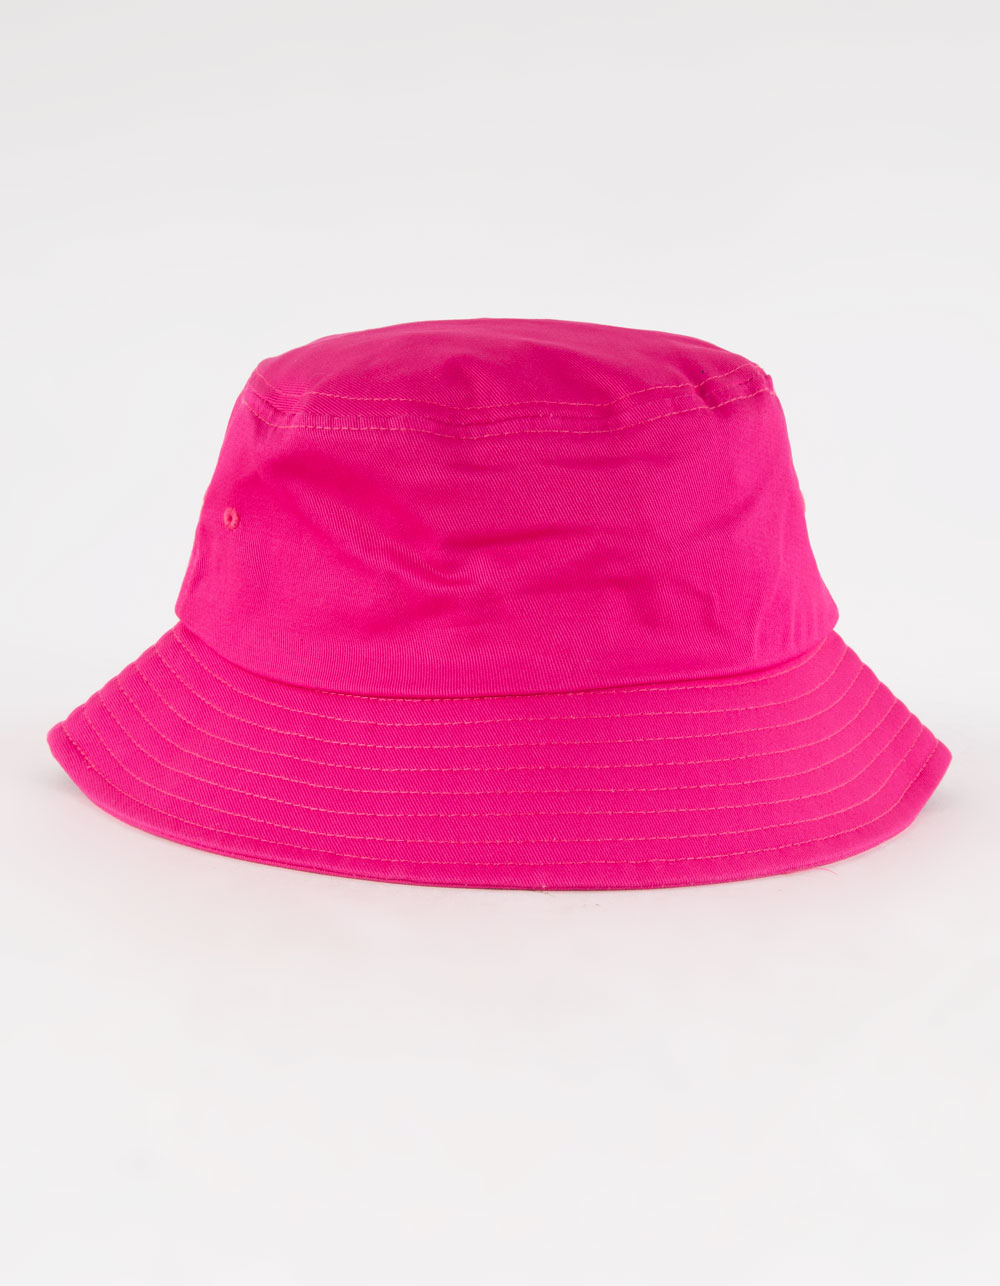 Playboy Bucket Hat - Hot Pink - One Size